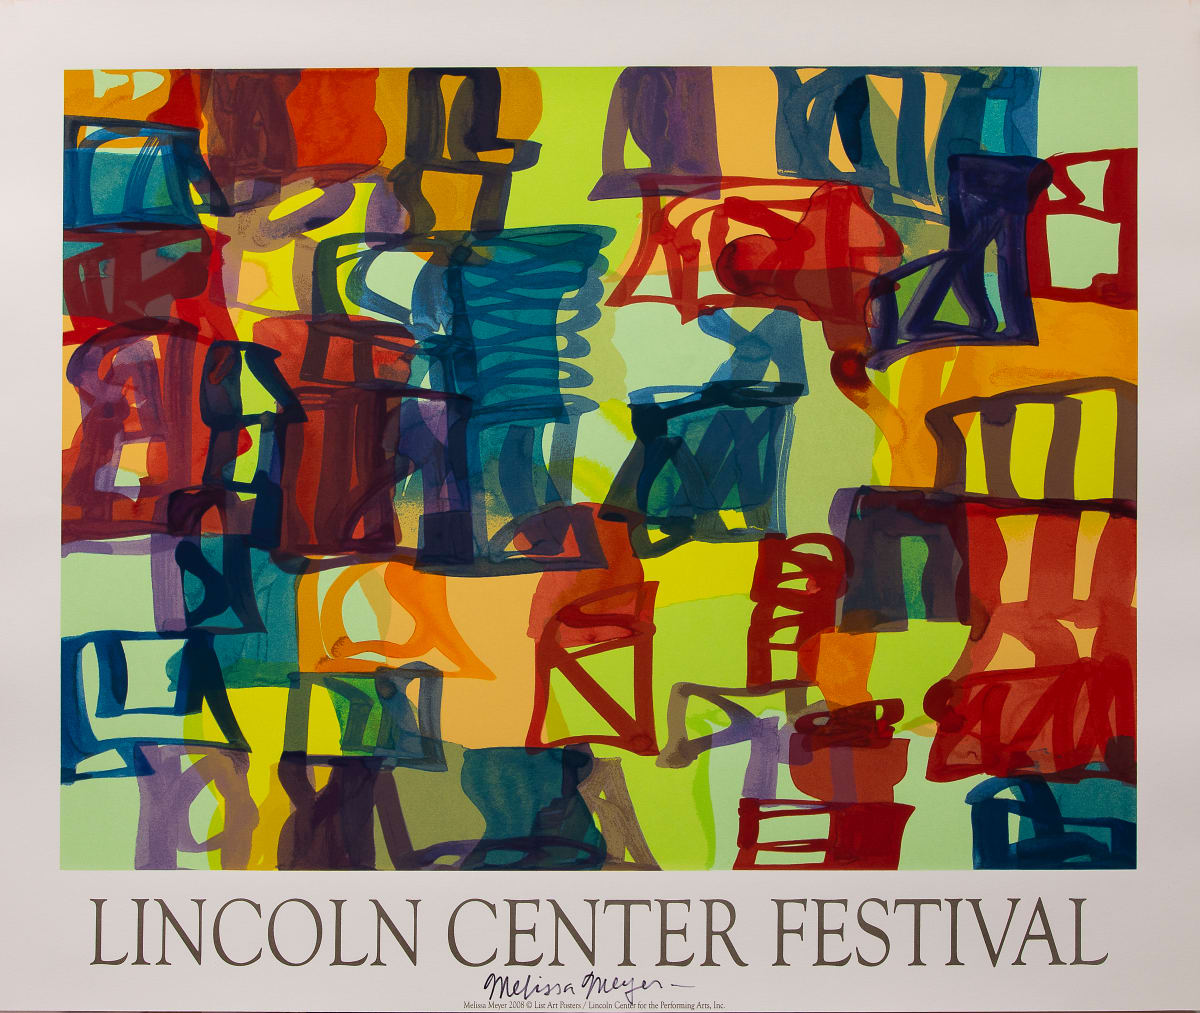 Untitled (Lincoln Center Festival Poster) by Melissa Meyer 